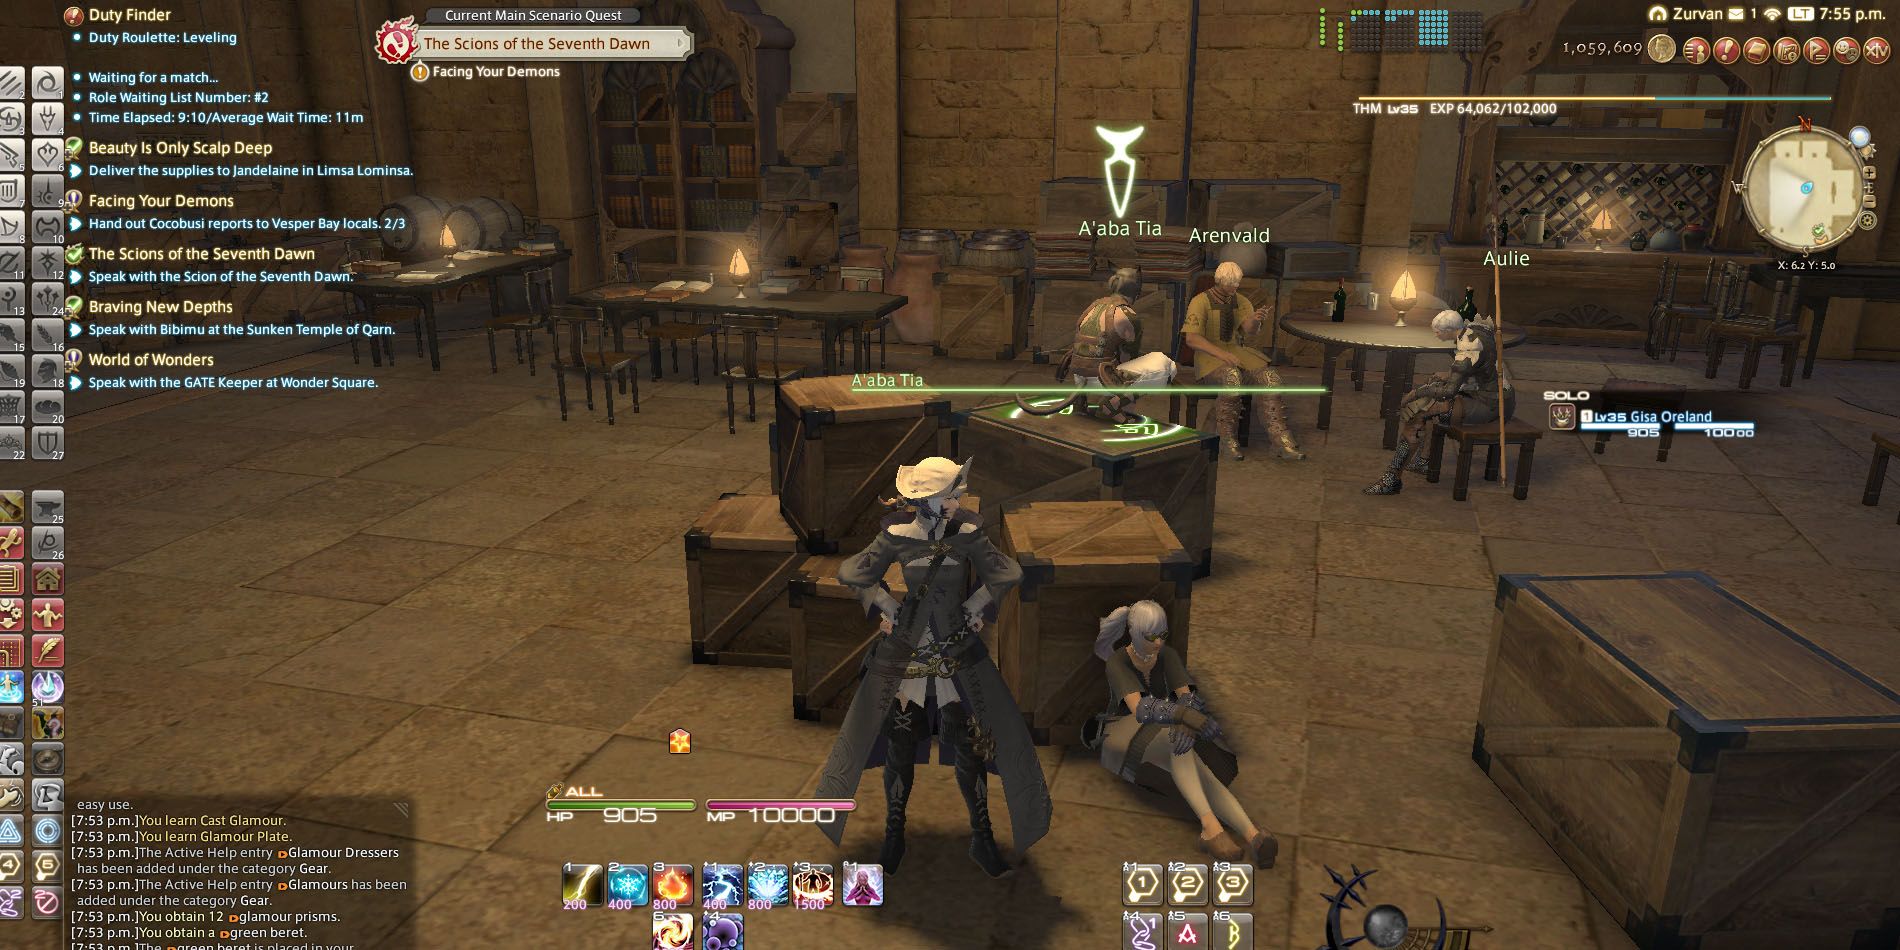 Free gil from playing on Zurvan server of Final Fantasy 14